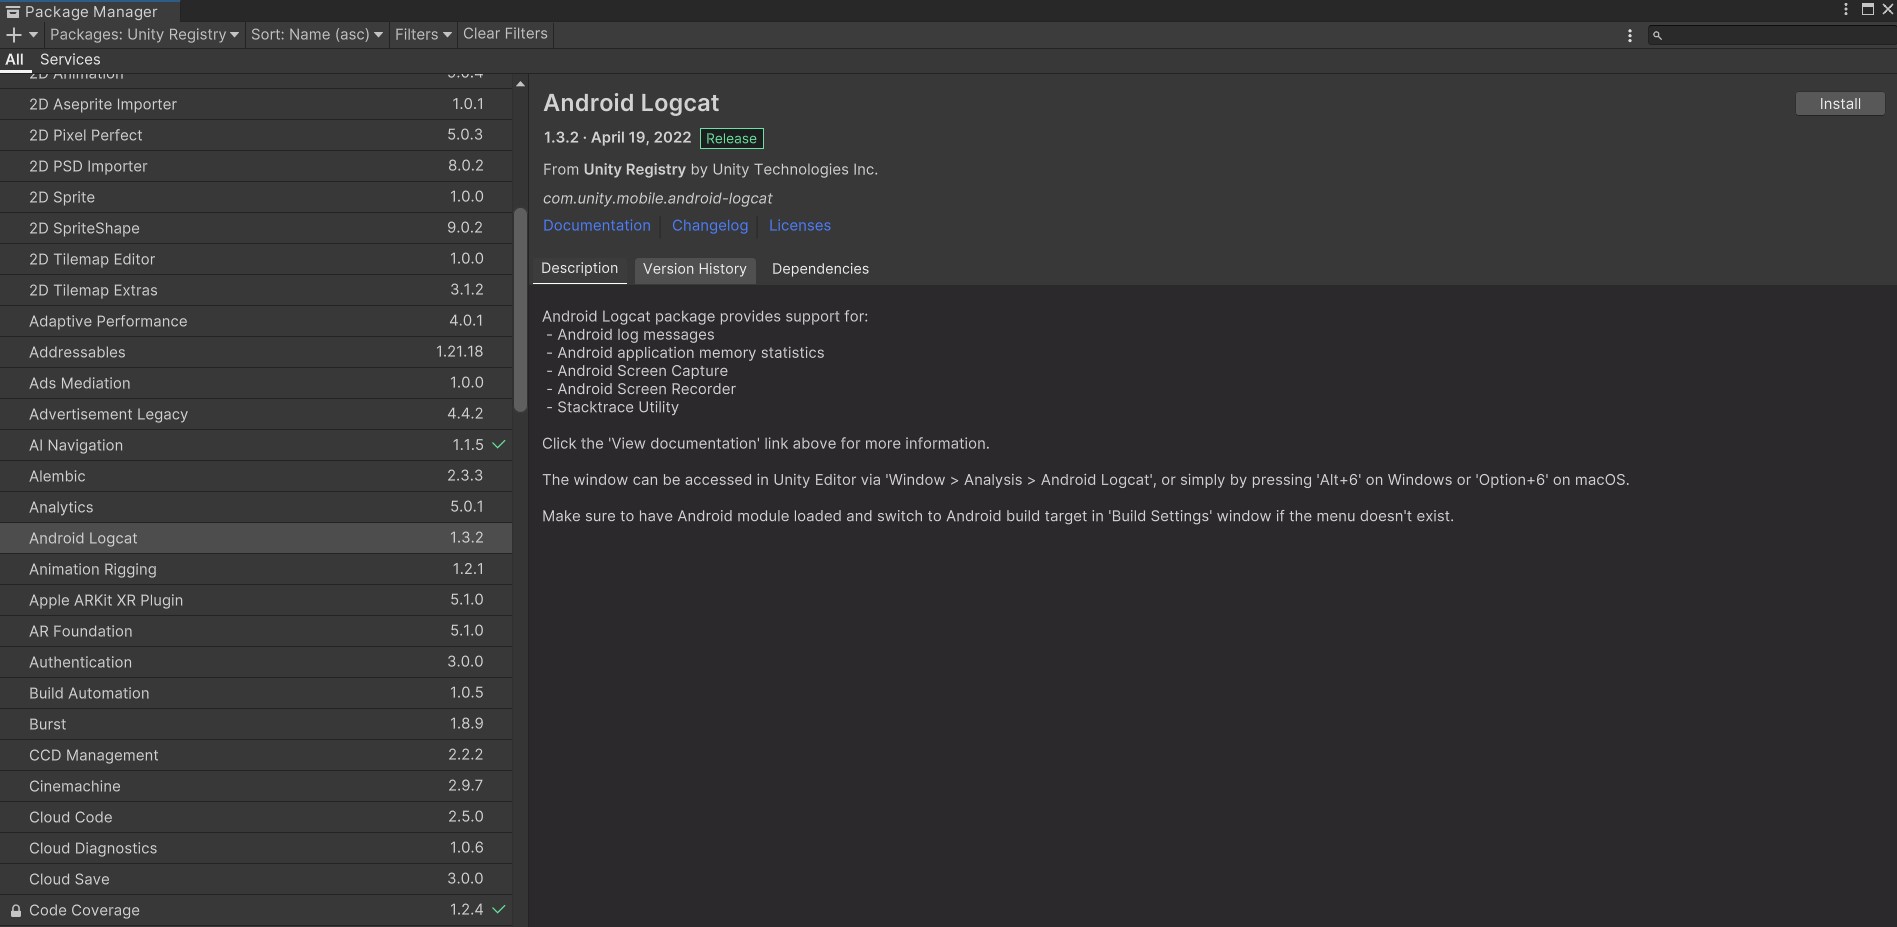 Android Logcat - PackageManager